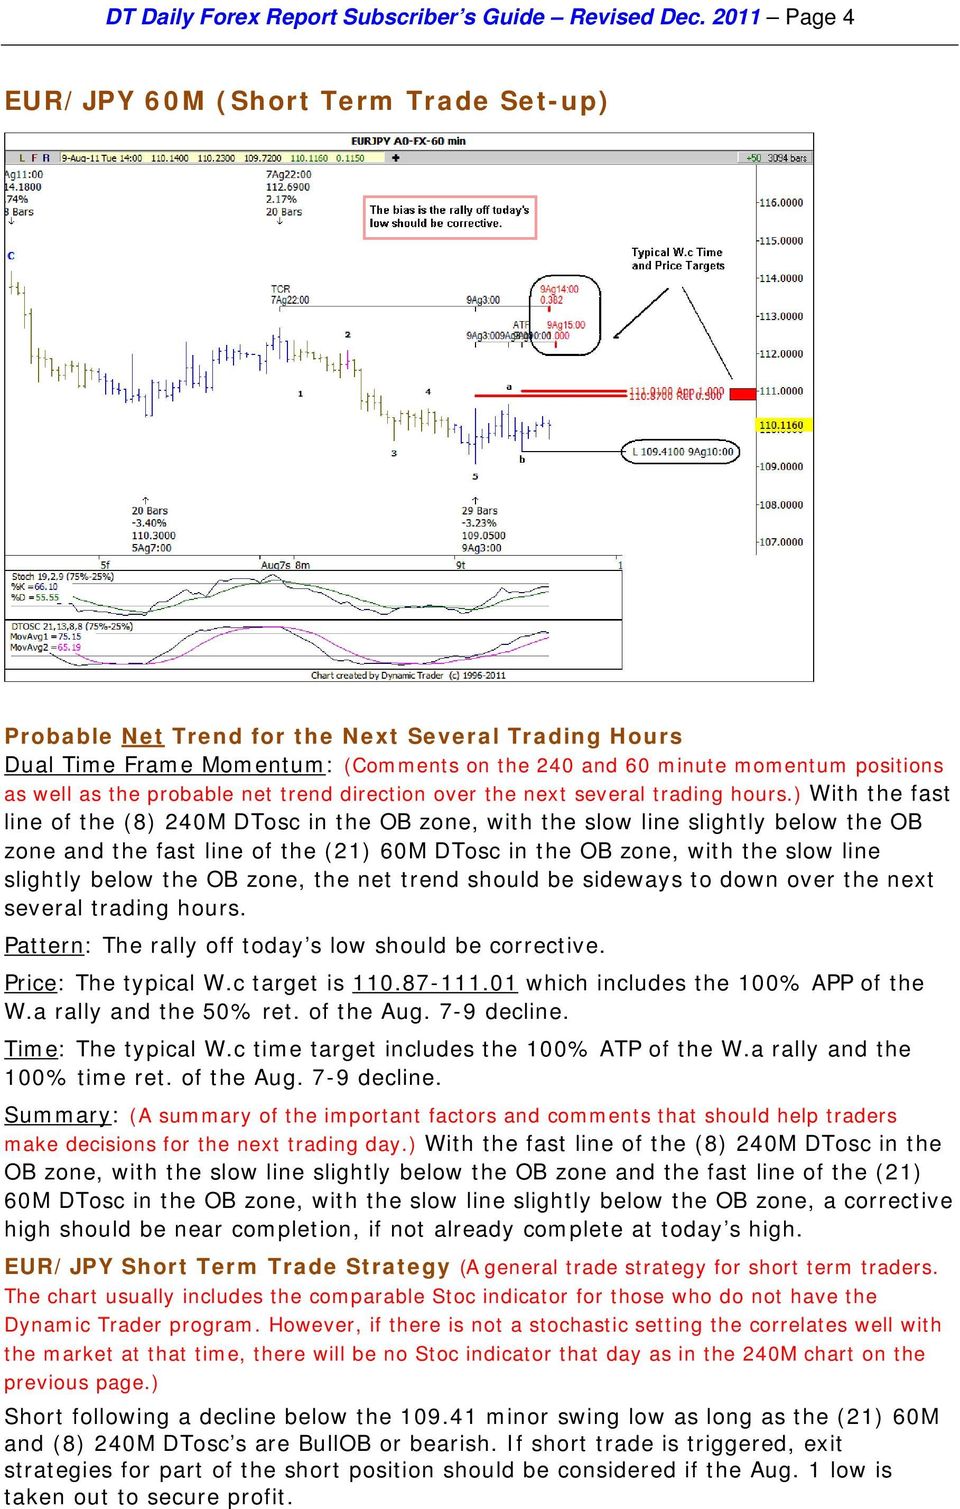 probable net trend direction over the next several trading hours.